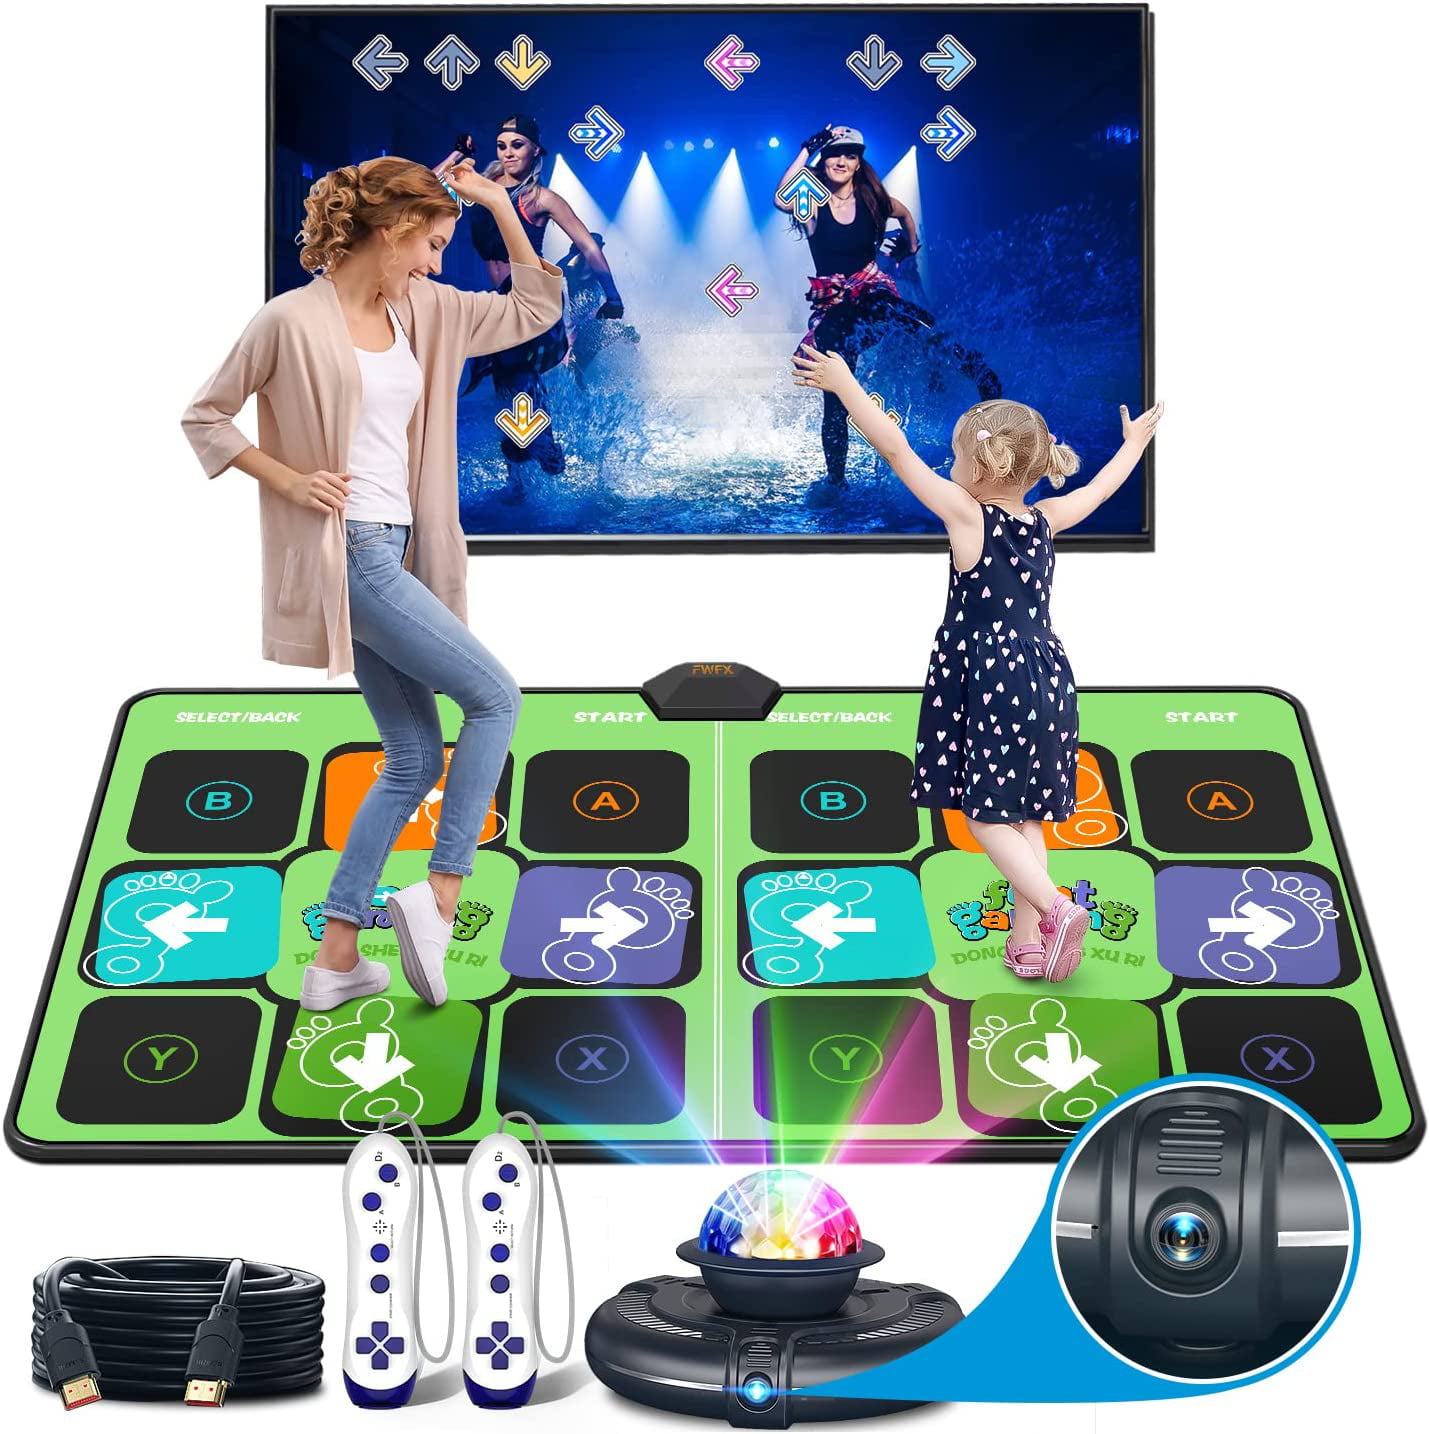 Dance Mat for Kids and Adults,Musical electronic dance mat Double User Yoga dance floor with Wireless Handle HD Camera Game Multi-Function Host Non-Slip Dance Pad HDMI Interface for TV 